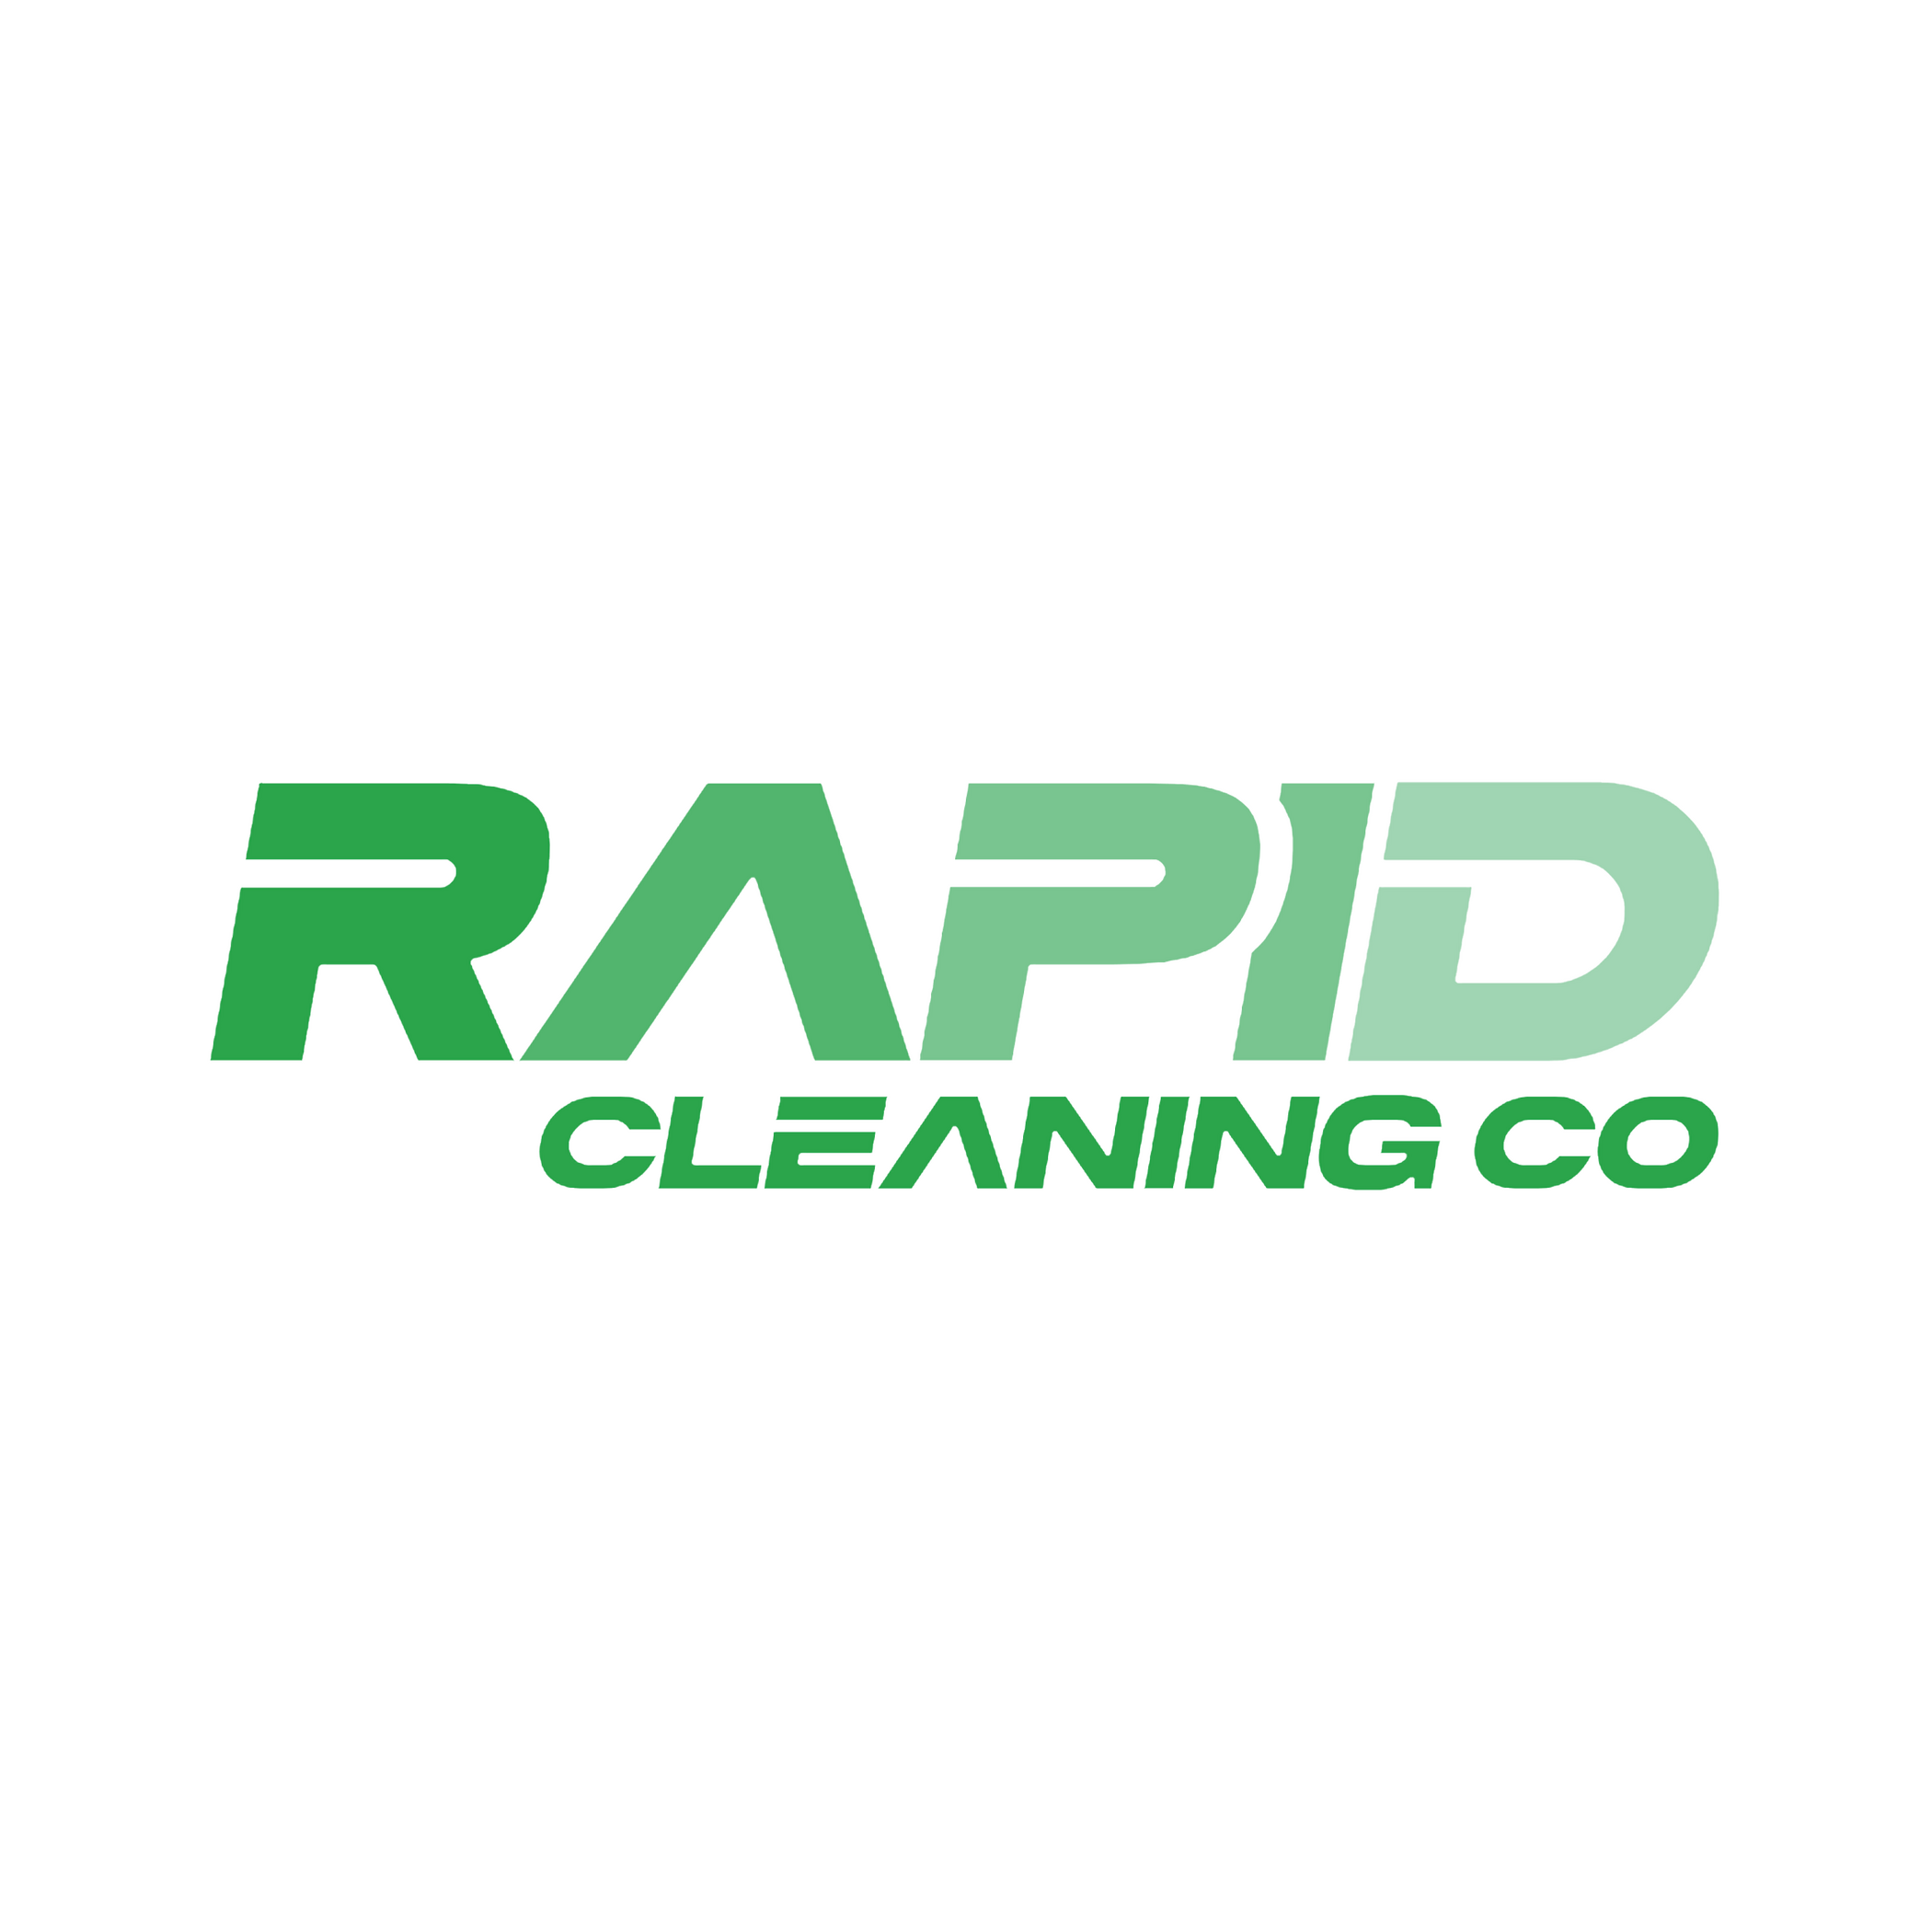 Rapid Cleaning Co. - Commerical Cleaners in Rapid City, Spearfish, and Sturgis, South Dakota